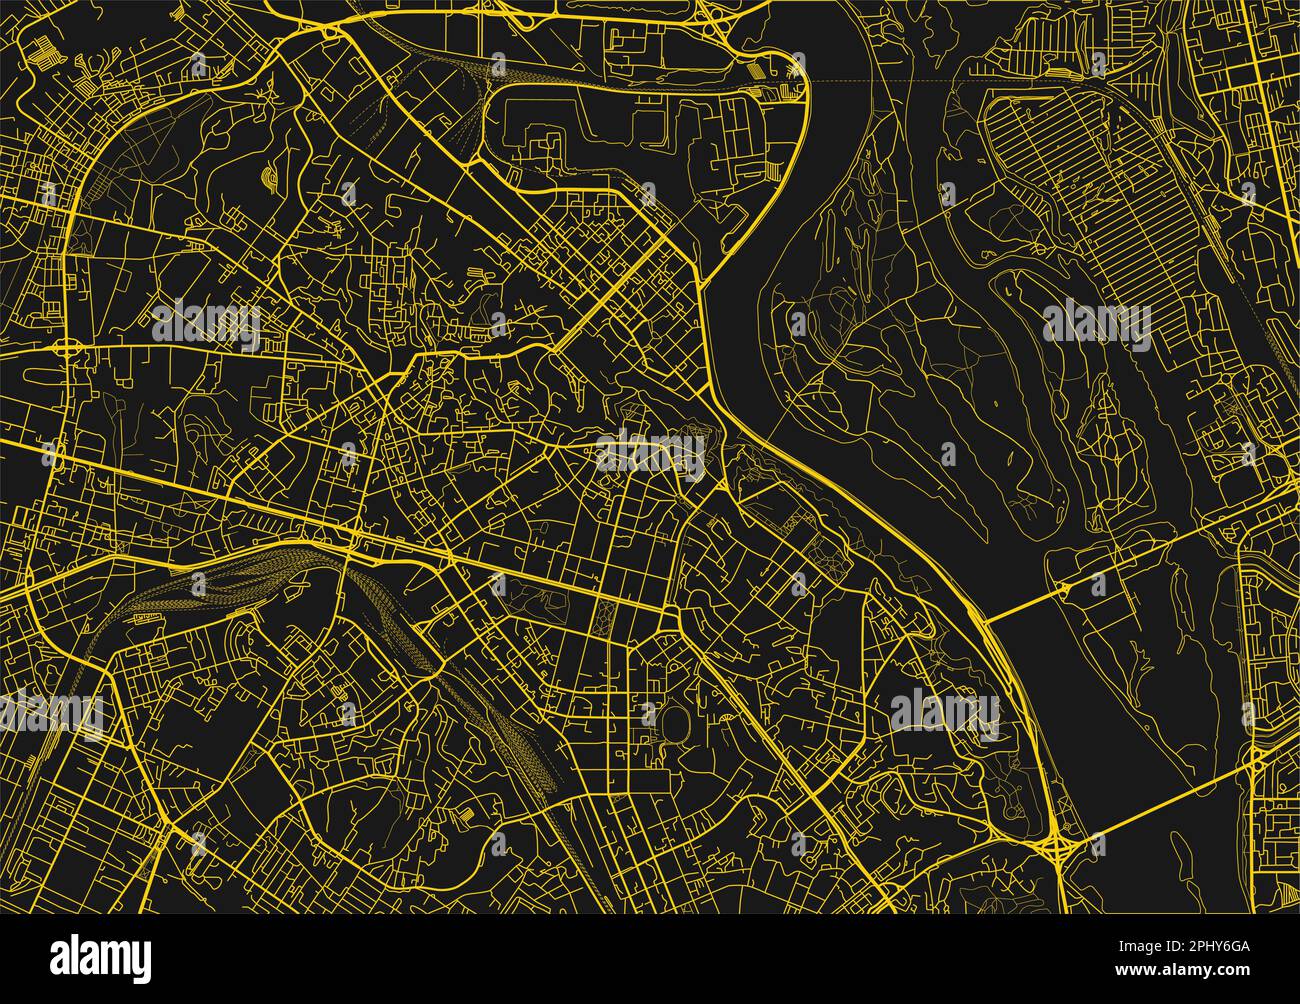 Black and yellow vector city map of Kiev with well organized separated layers. Stock Vector